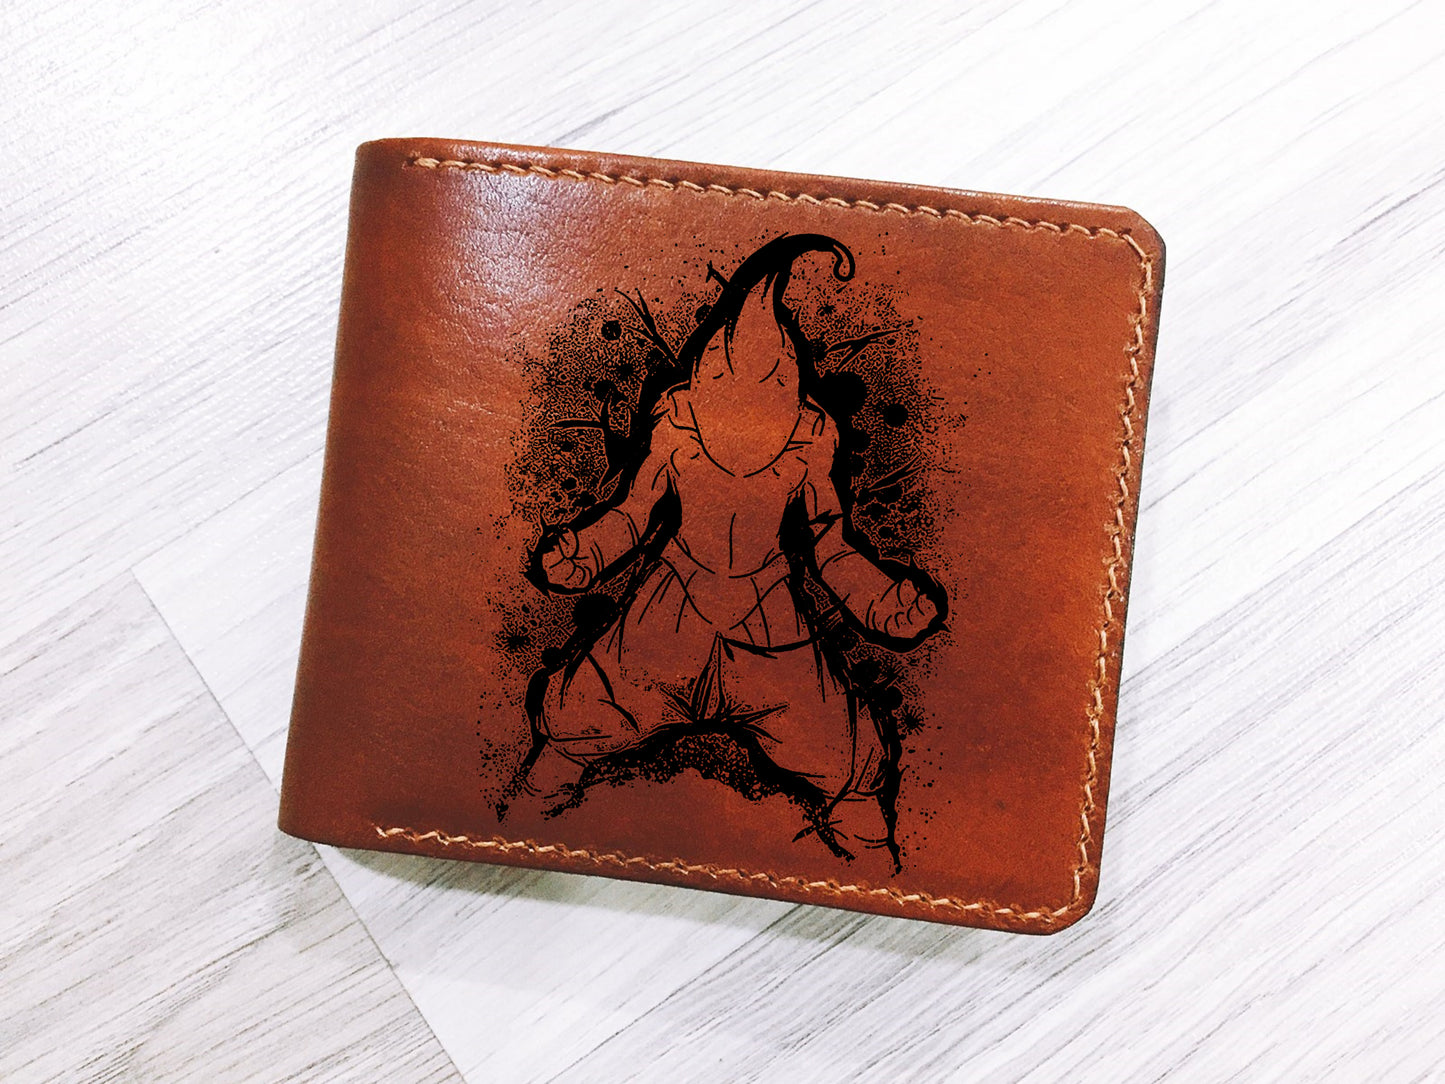 Mayan Corner - Dragon ball characters leather handmade wallet, Beerus God leather gift, customized gift for boyfriend, birthday anniversary present